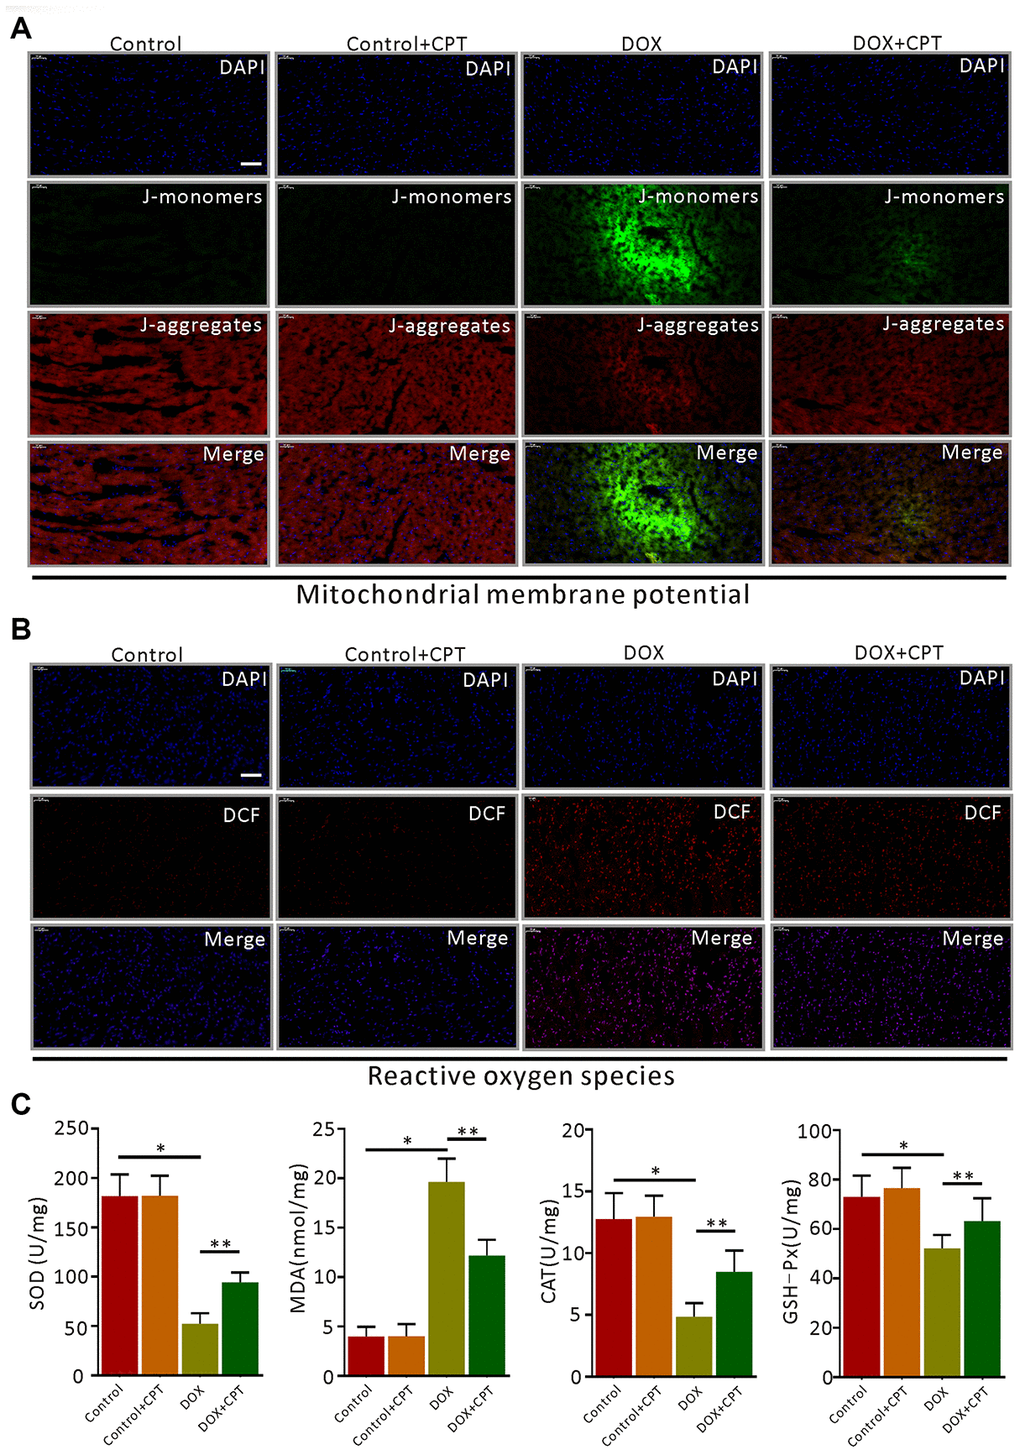 Cryptotanshinone (CPT) alleviated myocardial mitochondrial membrane potential (MMP) decline and oxidative stress in rats treated with doxorubicin. JC-1 fluorescent mitochondrial depolarization of LV cardiomyocytes for evaluating MMP (A). Detection of intracellular ROS by observing the fluorescence intensity of DCF in the LV of the rats (B). The levels of SOD, MDA, CAT, and GSH-Px in LV tissues of the rats induced by doxorubicin (C). Values are expressed as mean ± standard error of the mean. *P#P